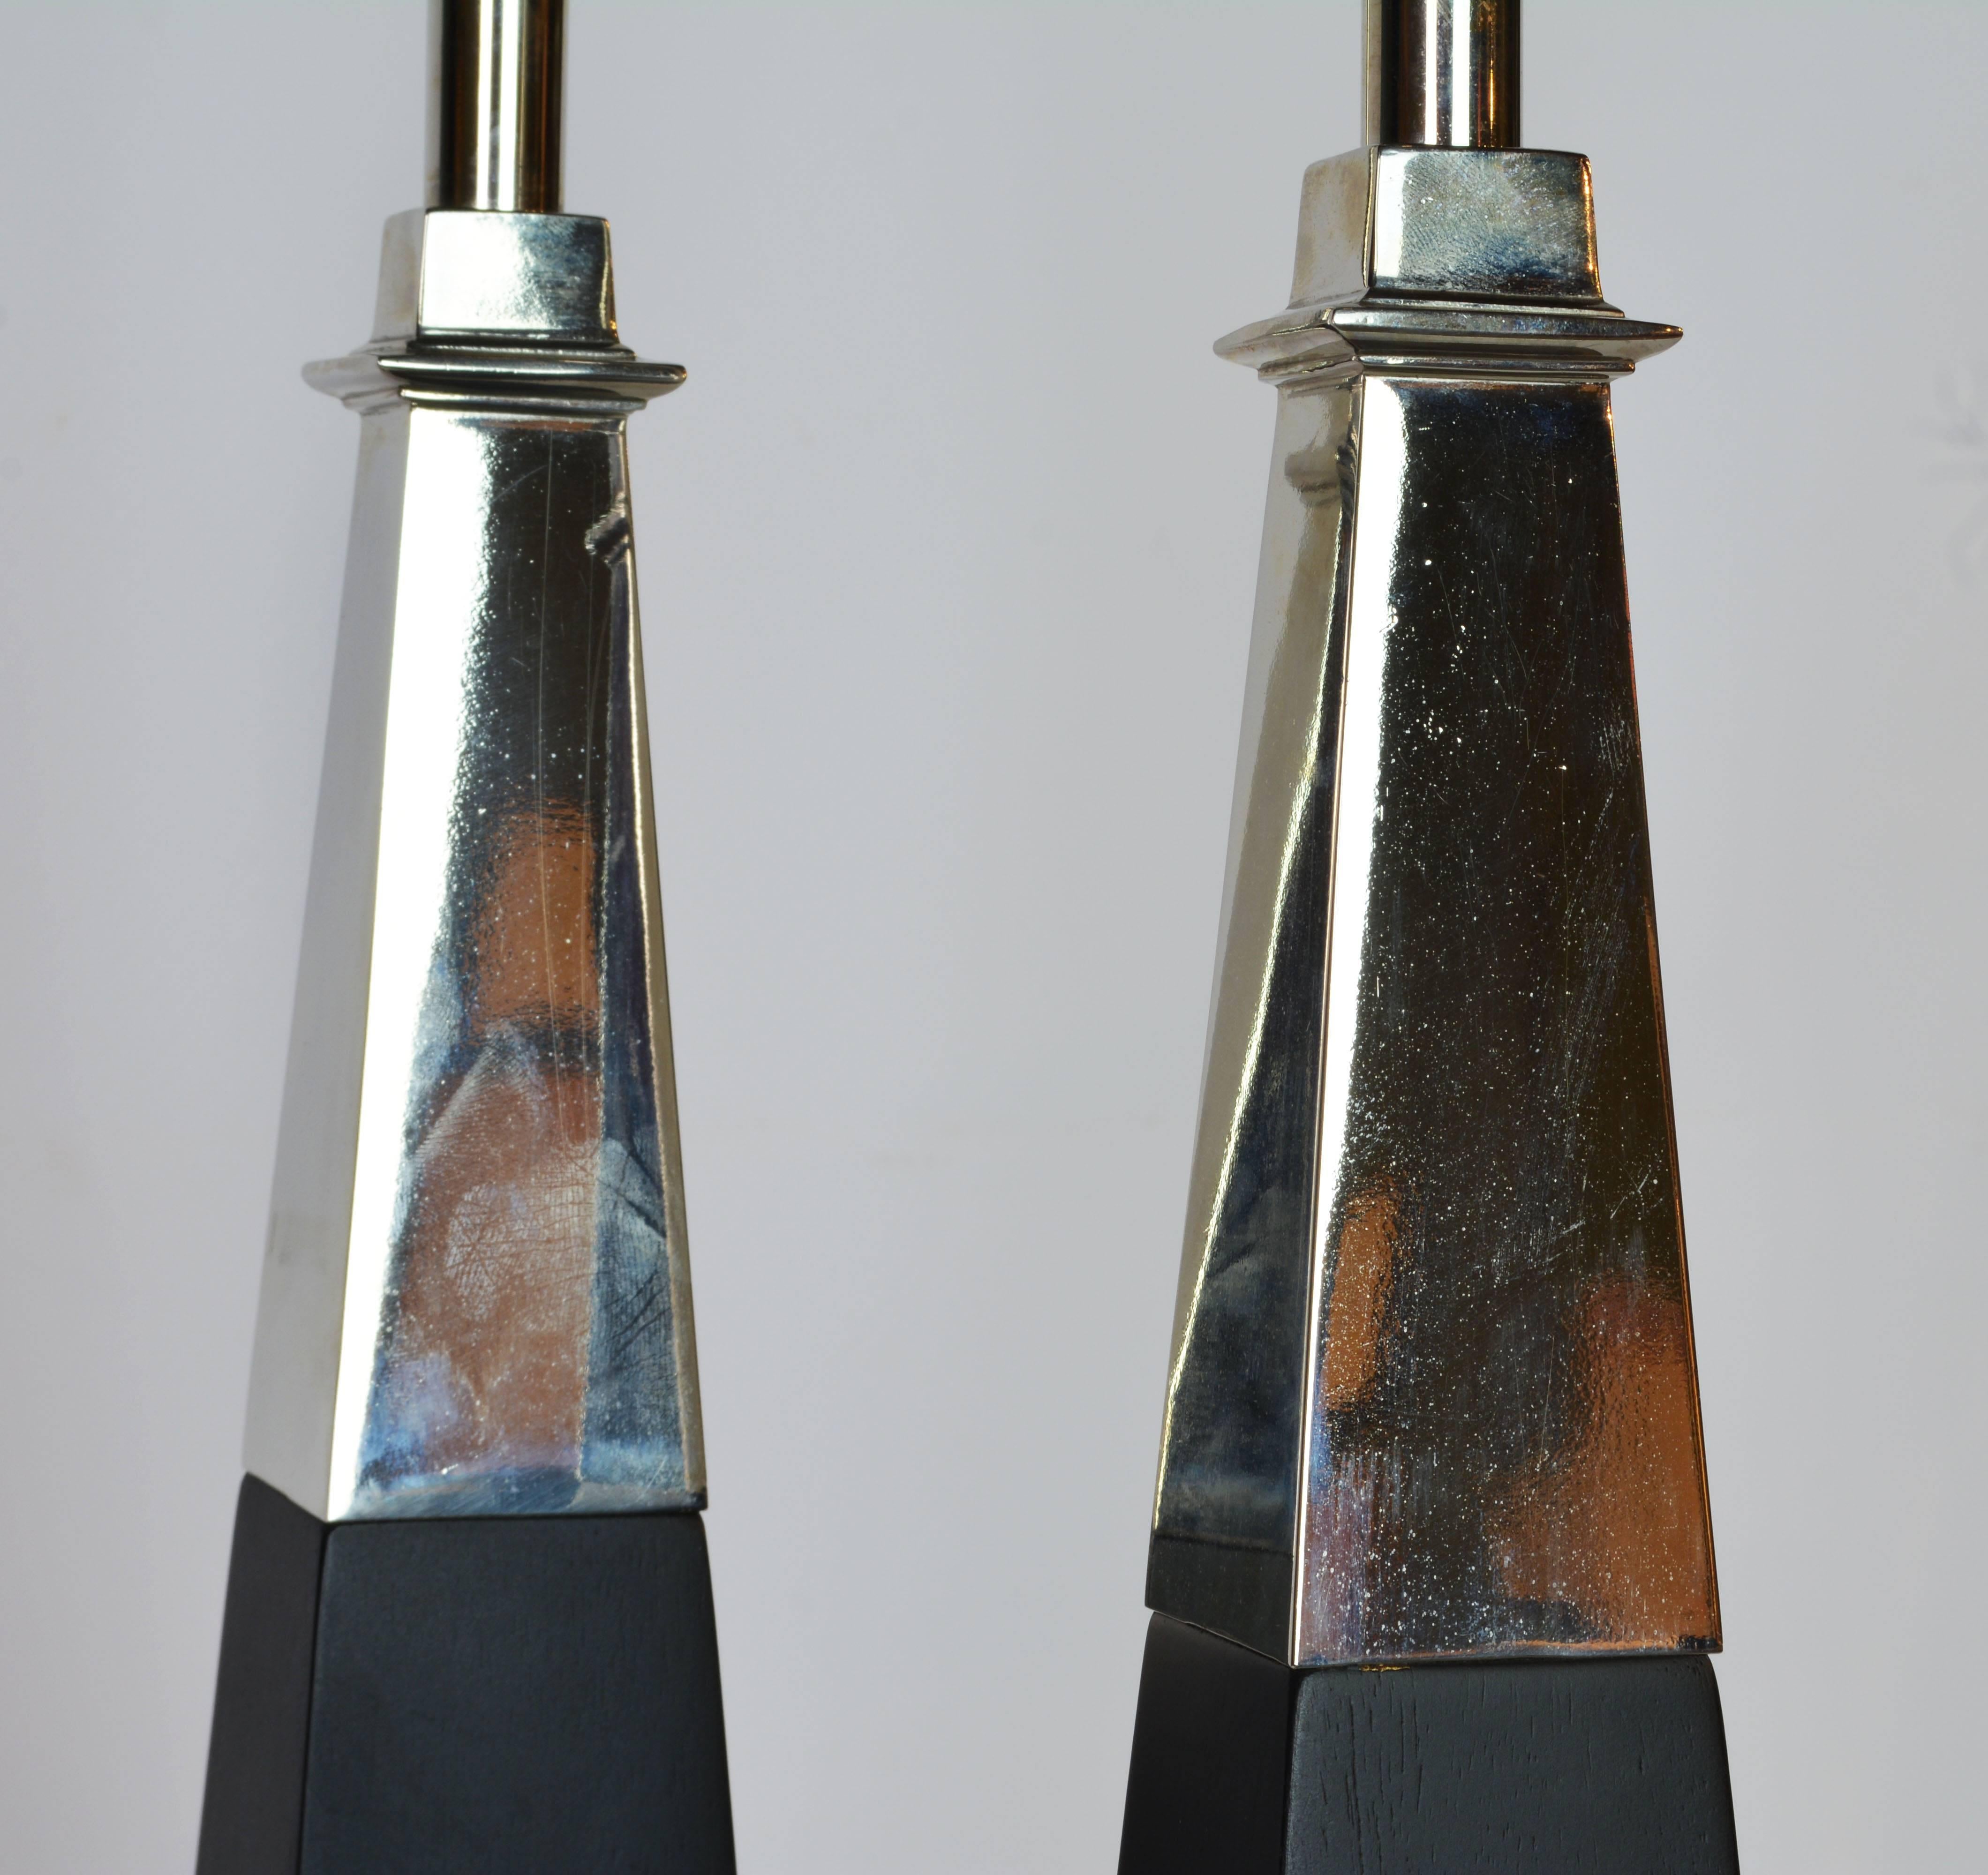 American Pair of Chrome and Ebonized Wood Obelisk Lamps by Tommi Parzinger for Stiffel